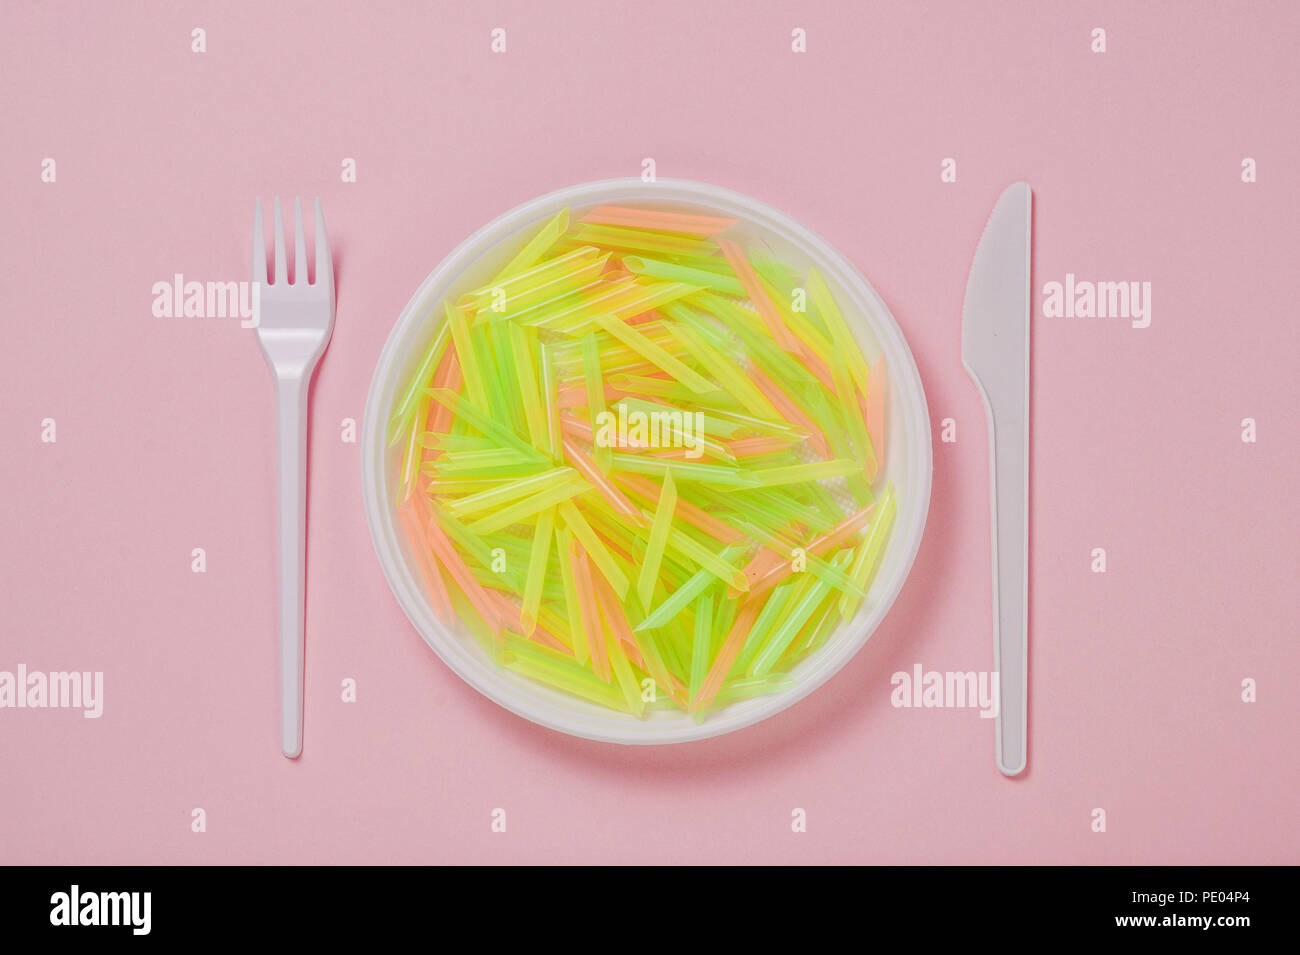 Plate, knife and fork of plastic on a pink background Stock Photo